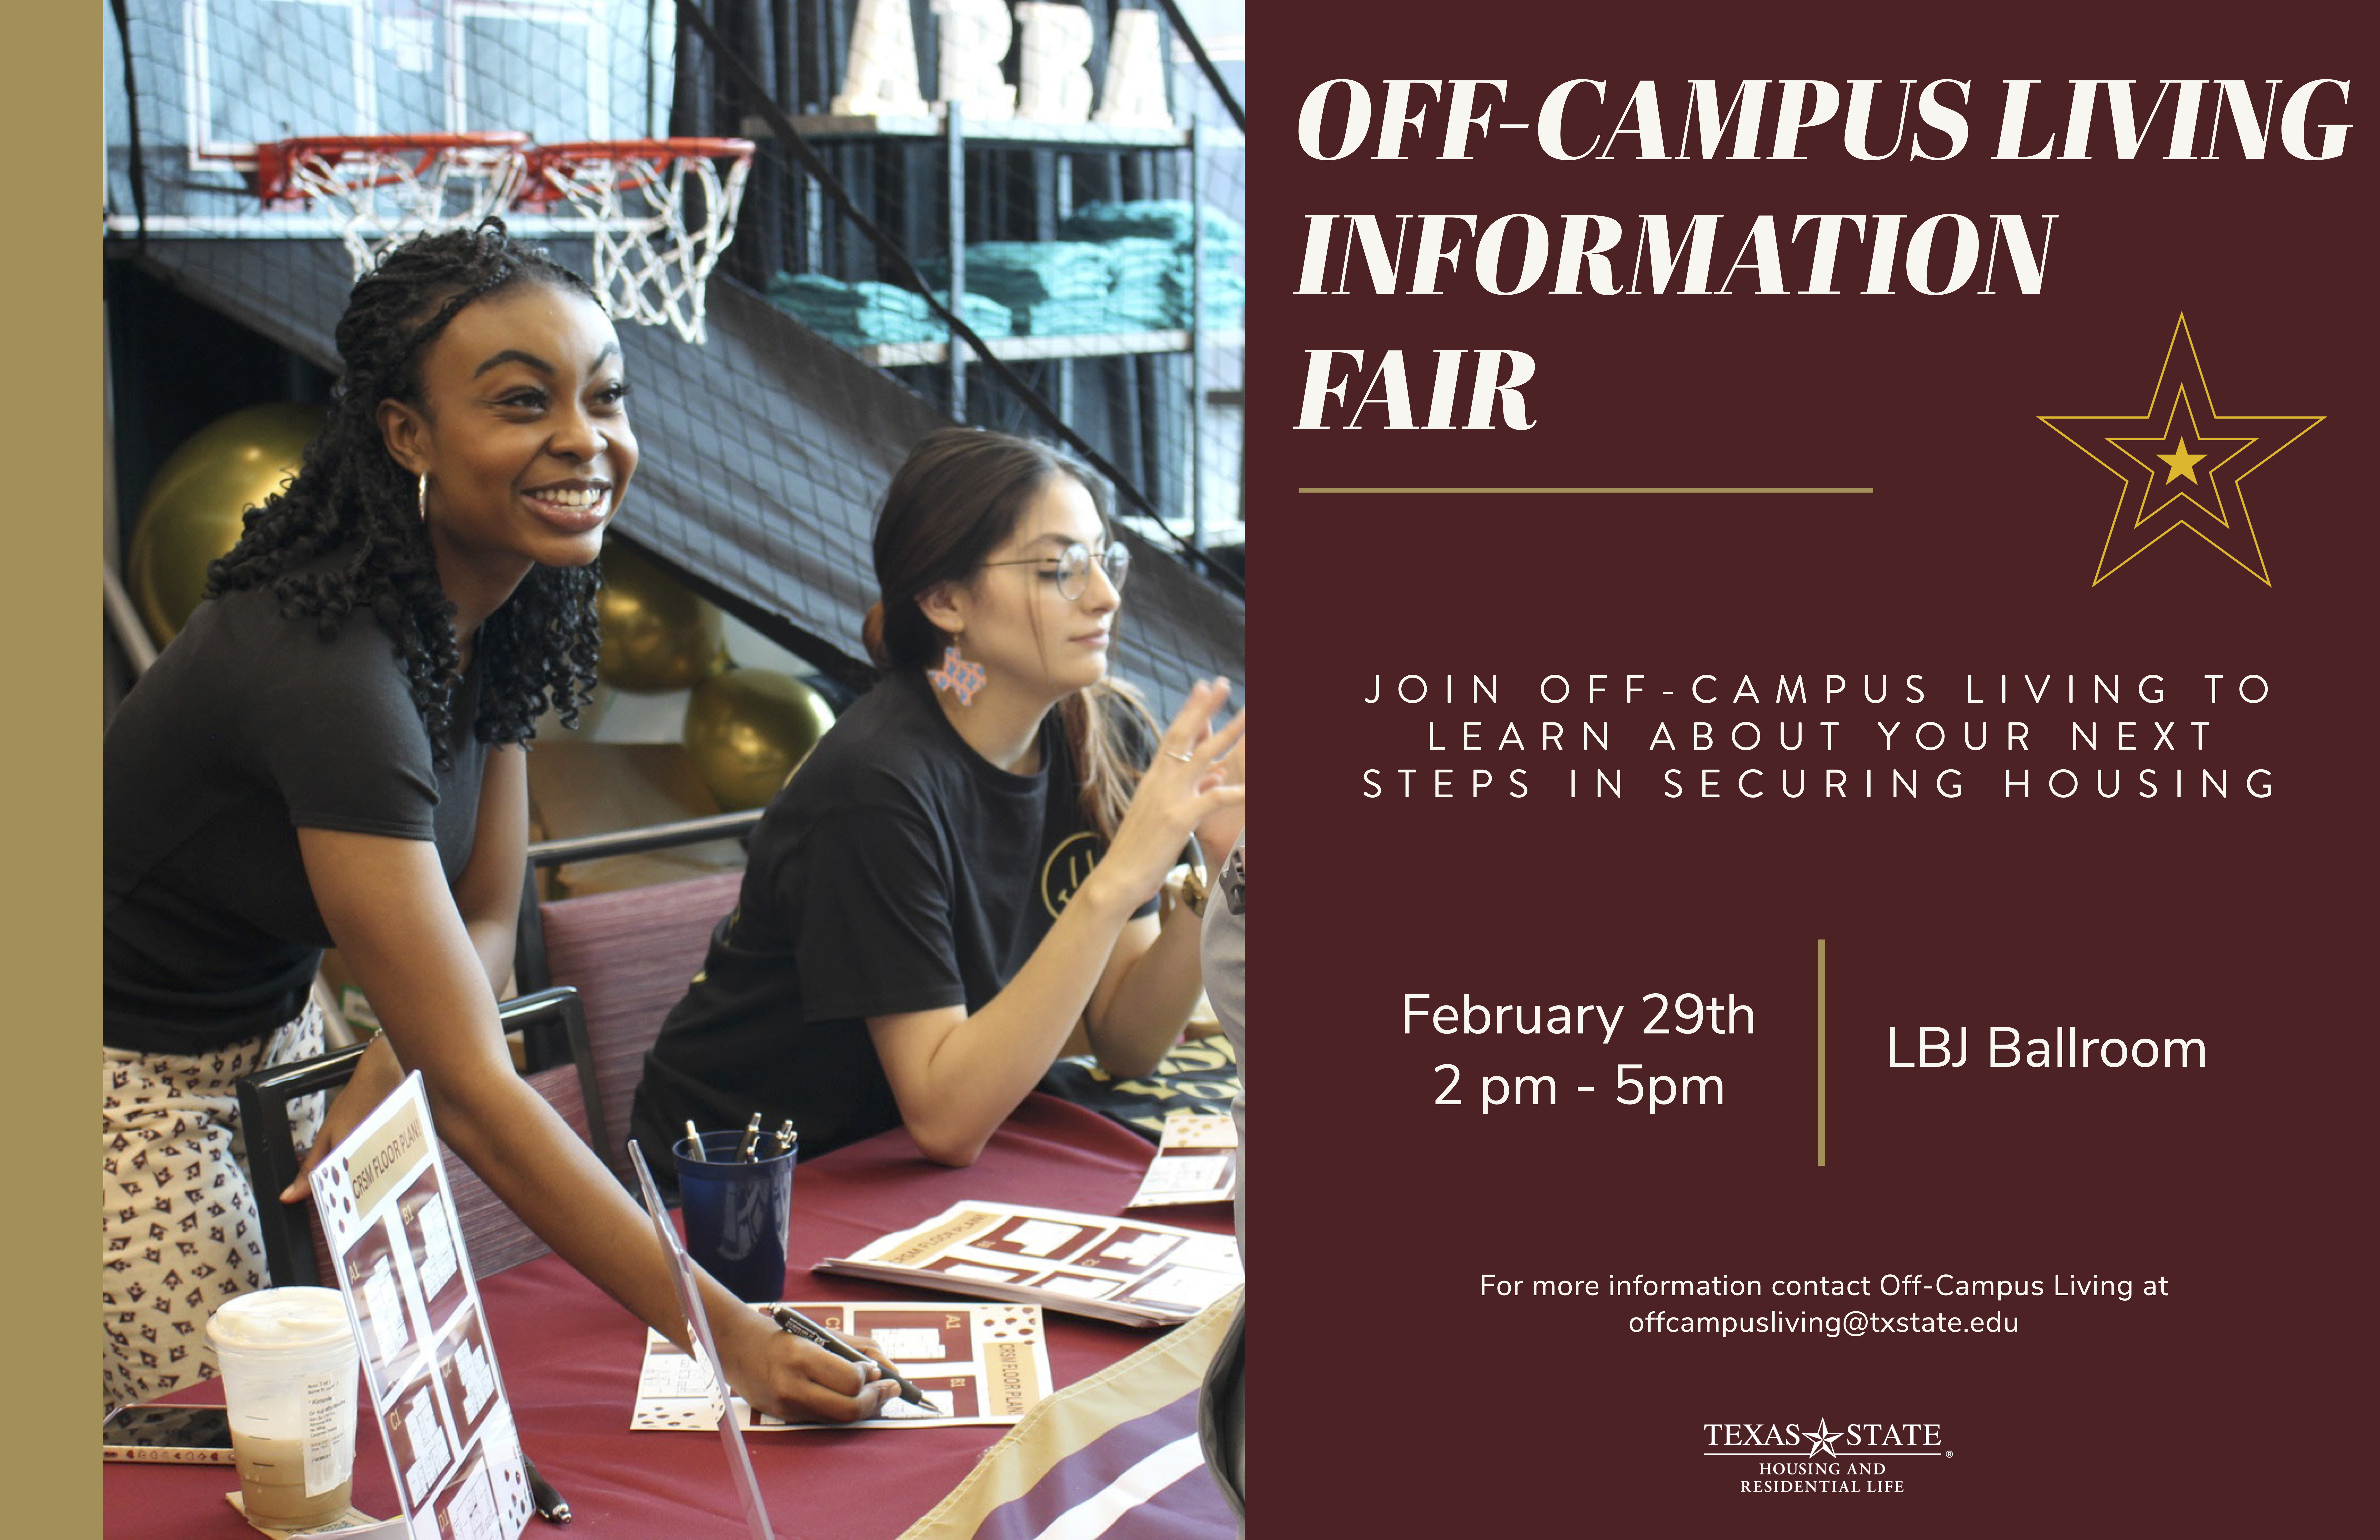 Off-Campus Living Expo February 29th 2pm - 5pm LBJ Ballroom, for more information contact off-campus living at offcampusliving@txstate.edu